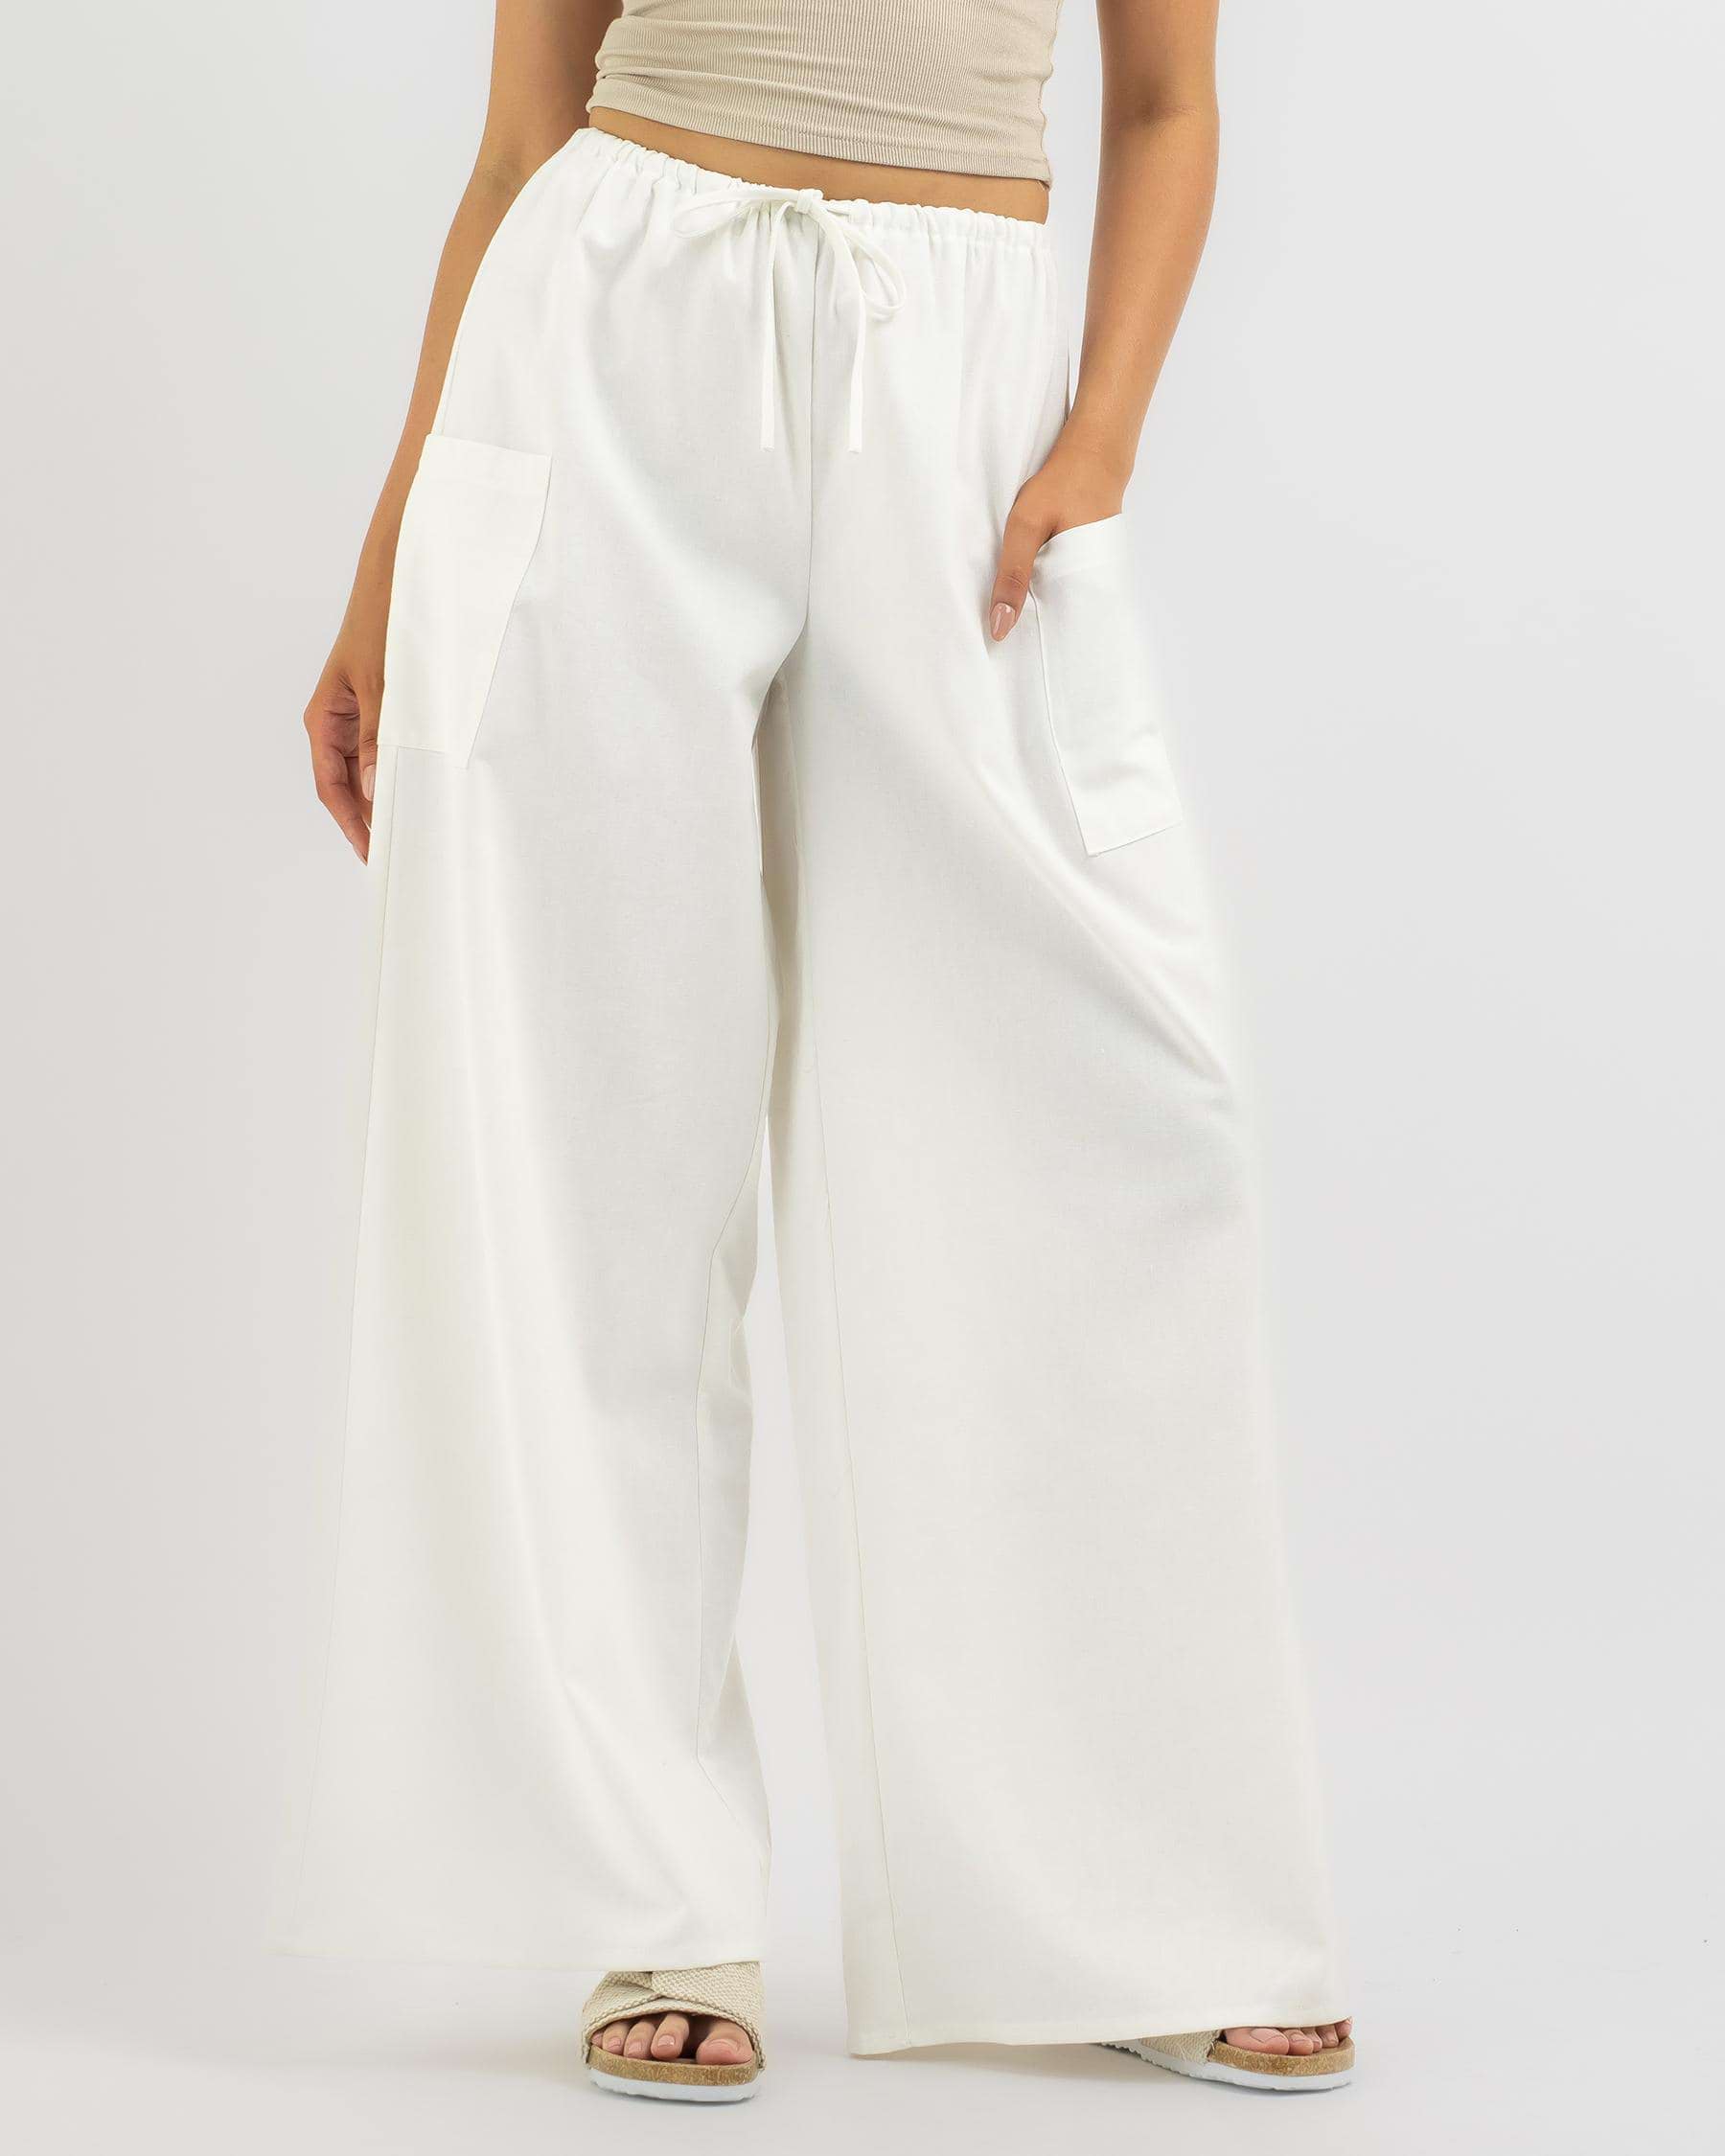 Into Fashions Sorrento Beach Pants In White - Fast Shipping & Easy ...